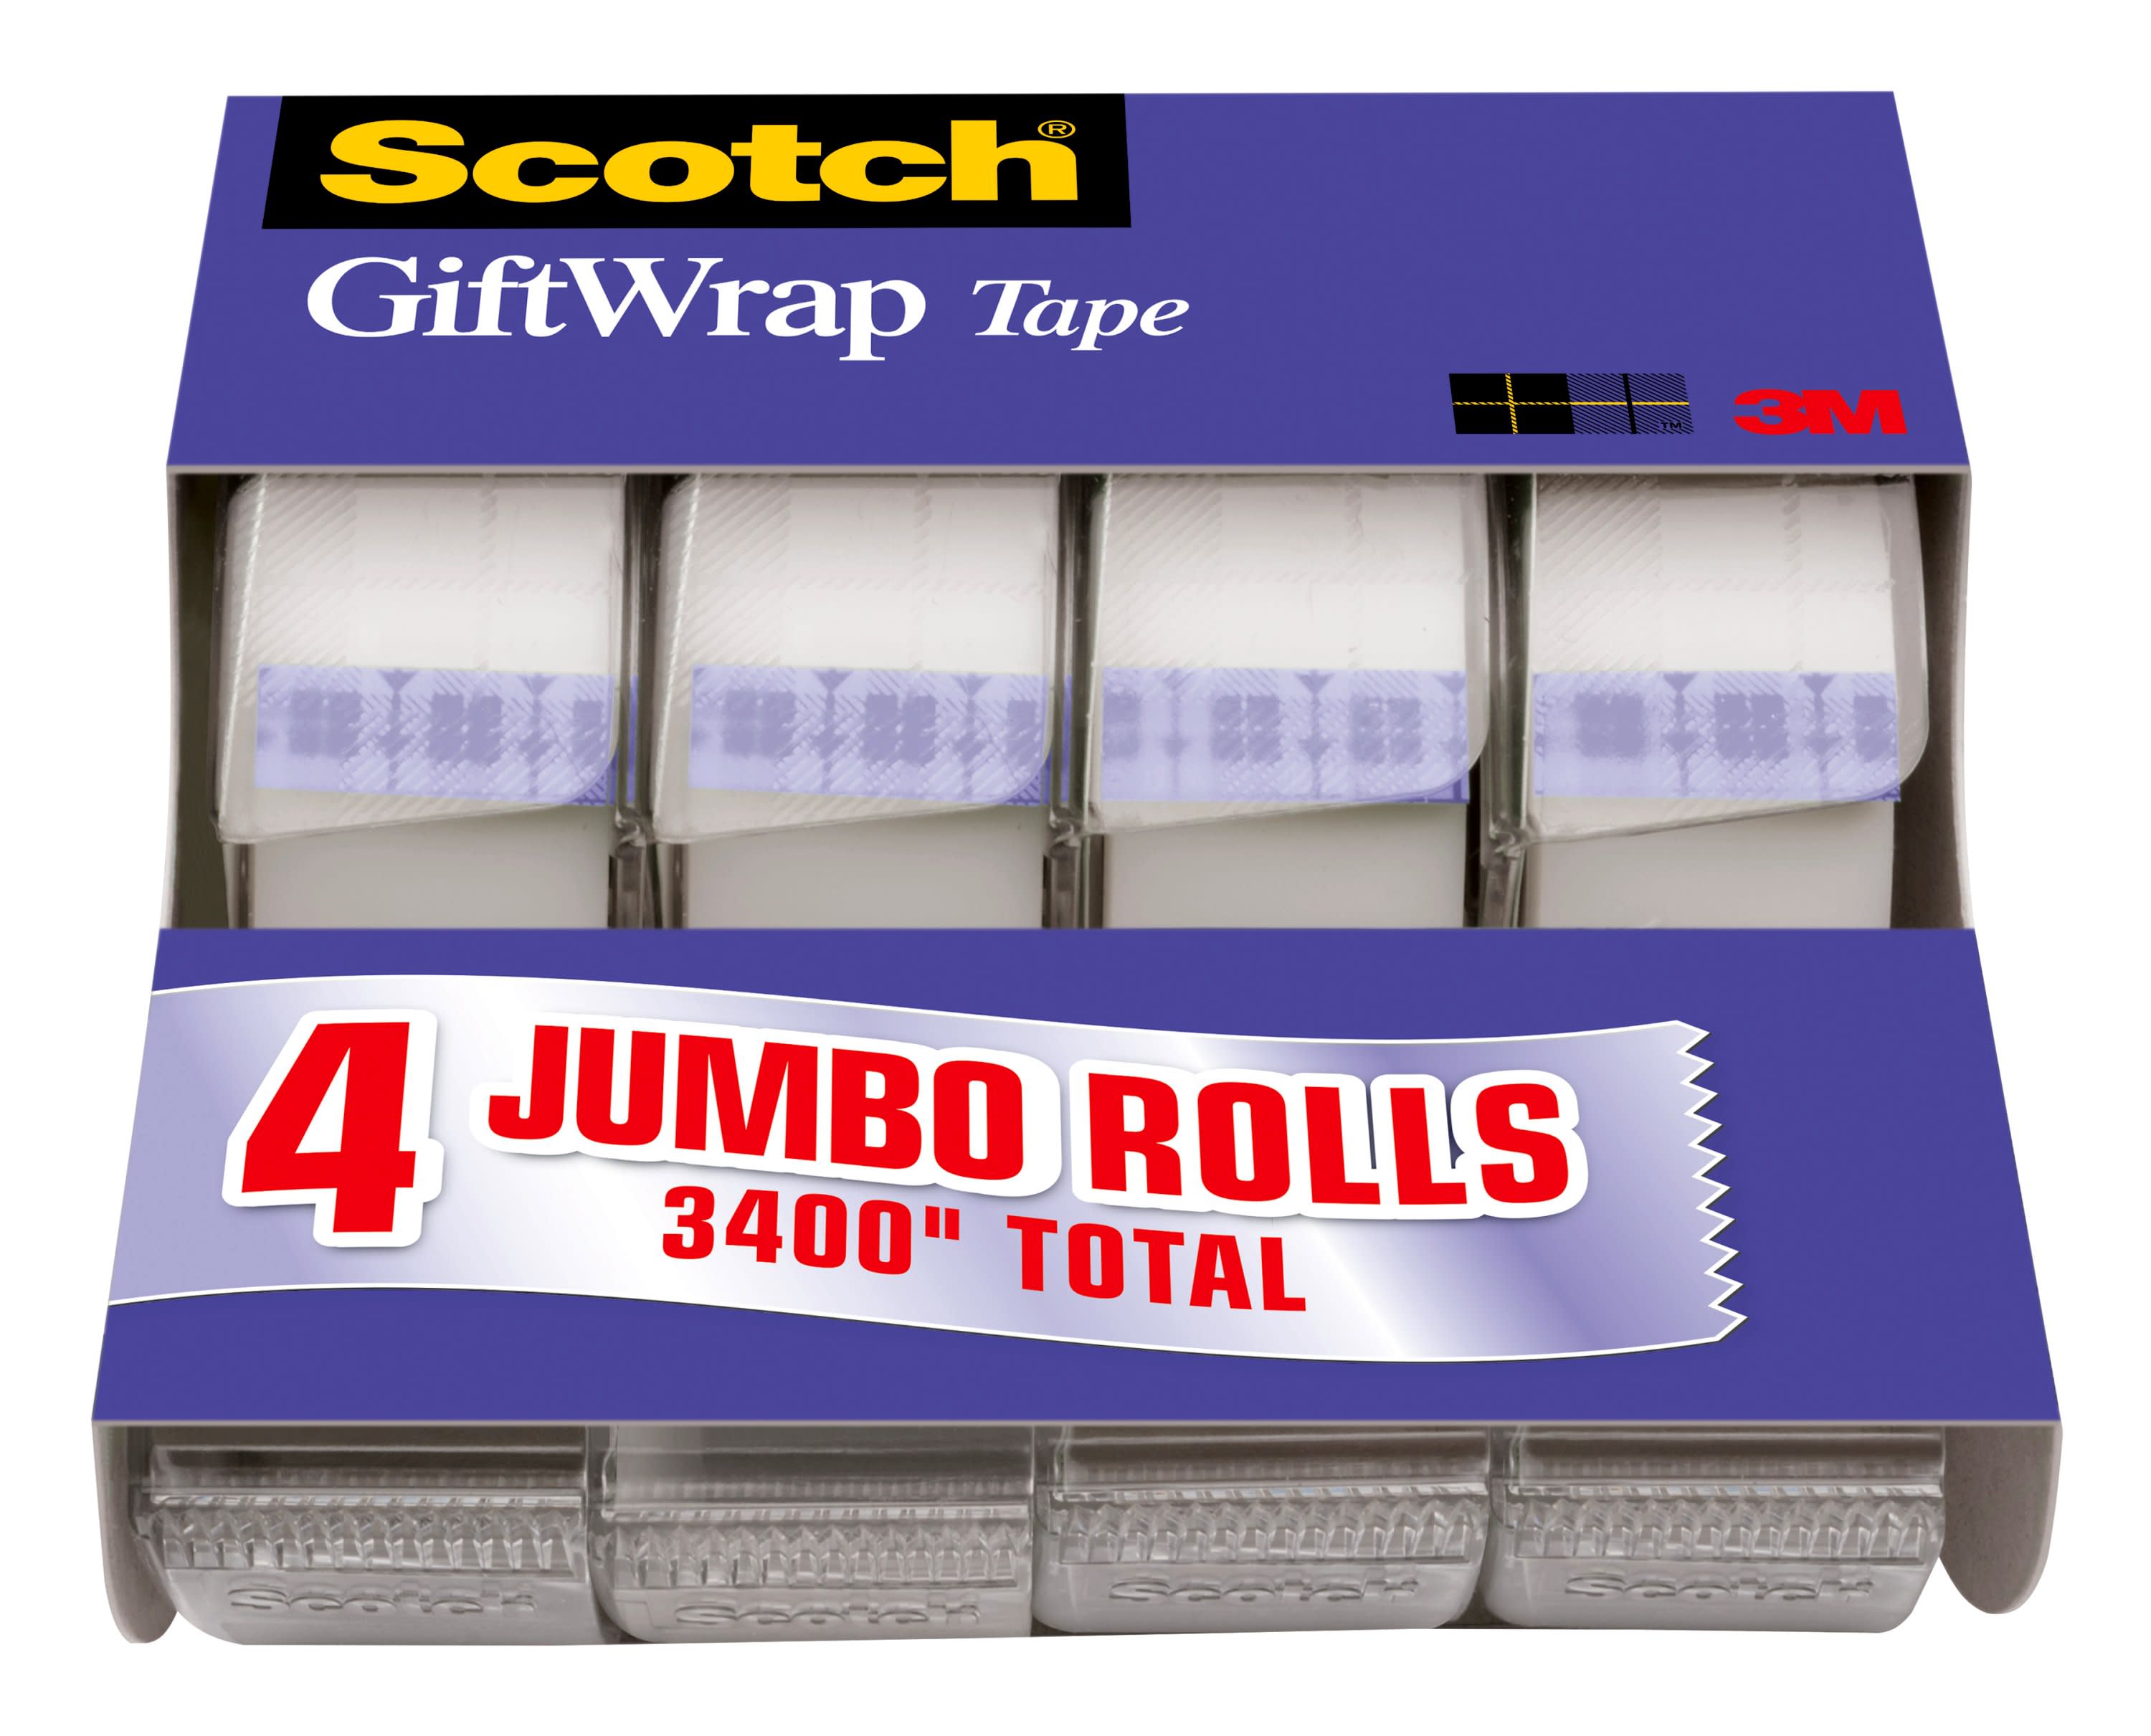 Tabletop Gift Wrapping Tool Two Clamp Tape Dispenser To Secure Your  Wrapping Paper Roll & Tape Wrapping Fits Any Size